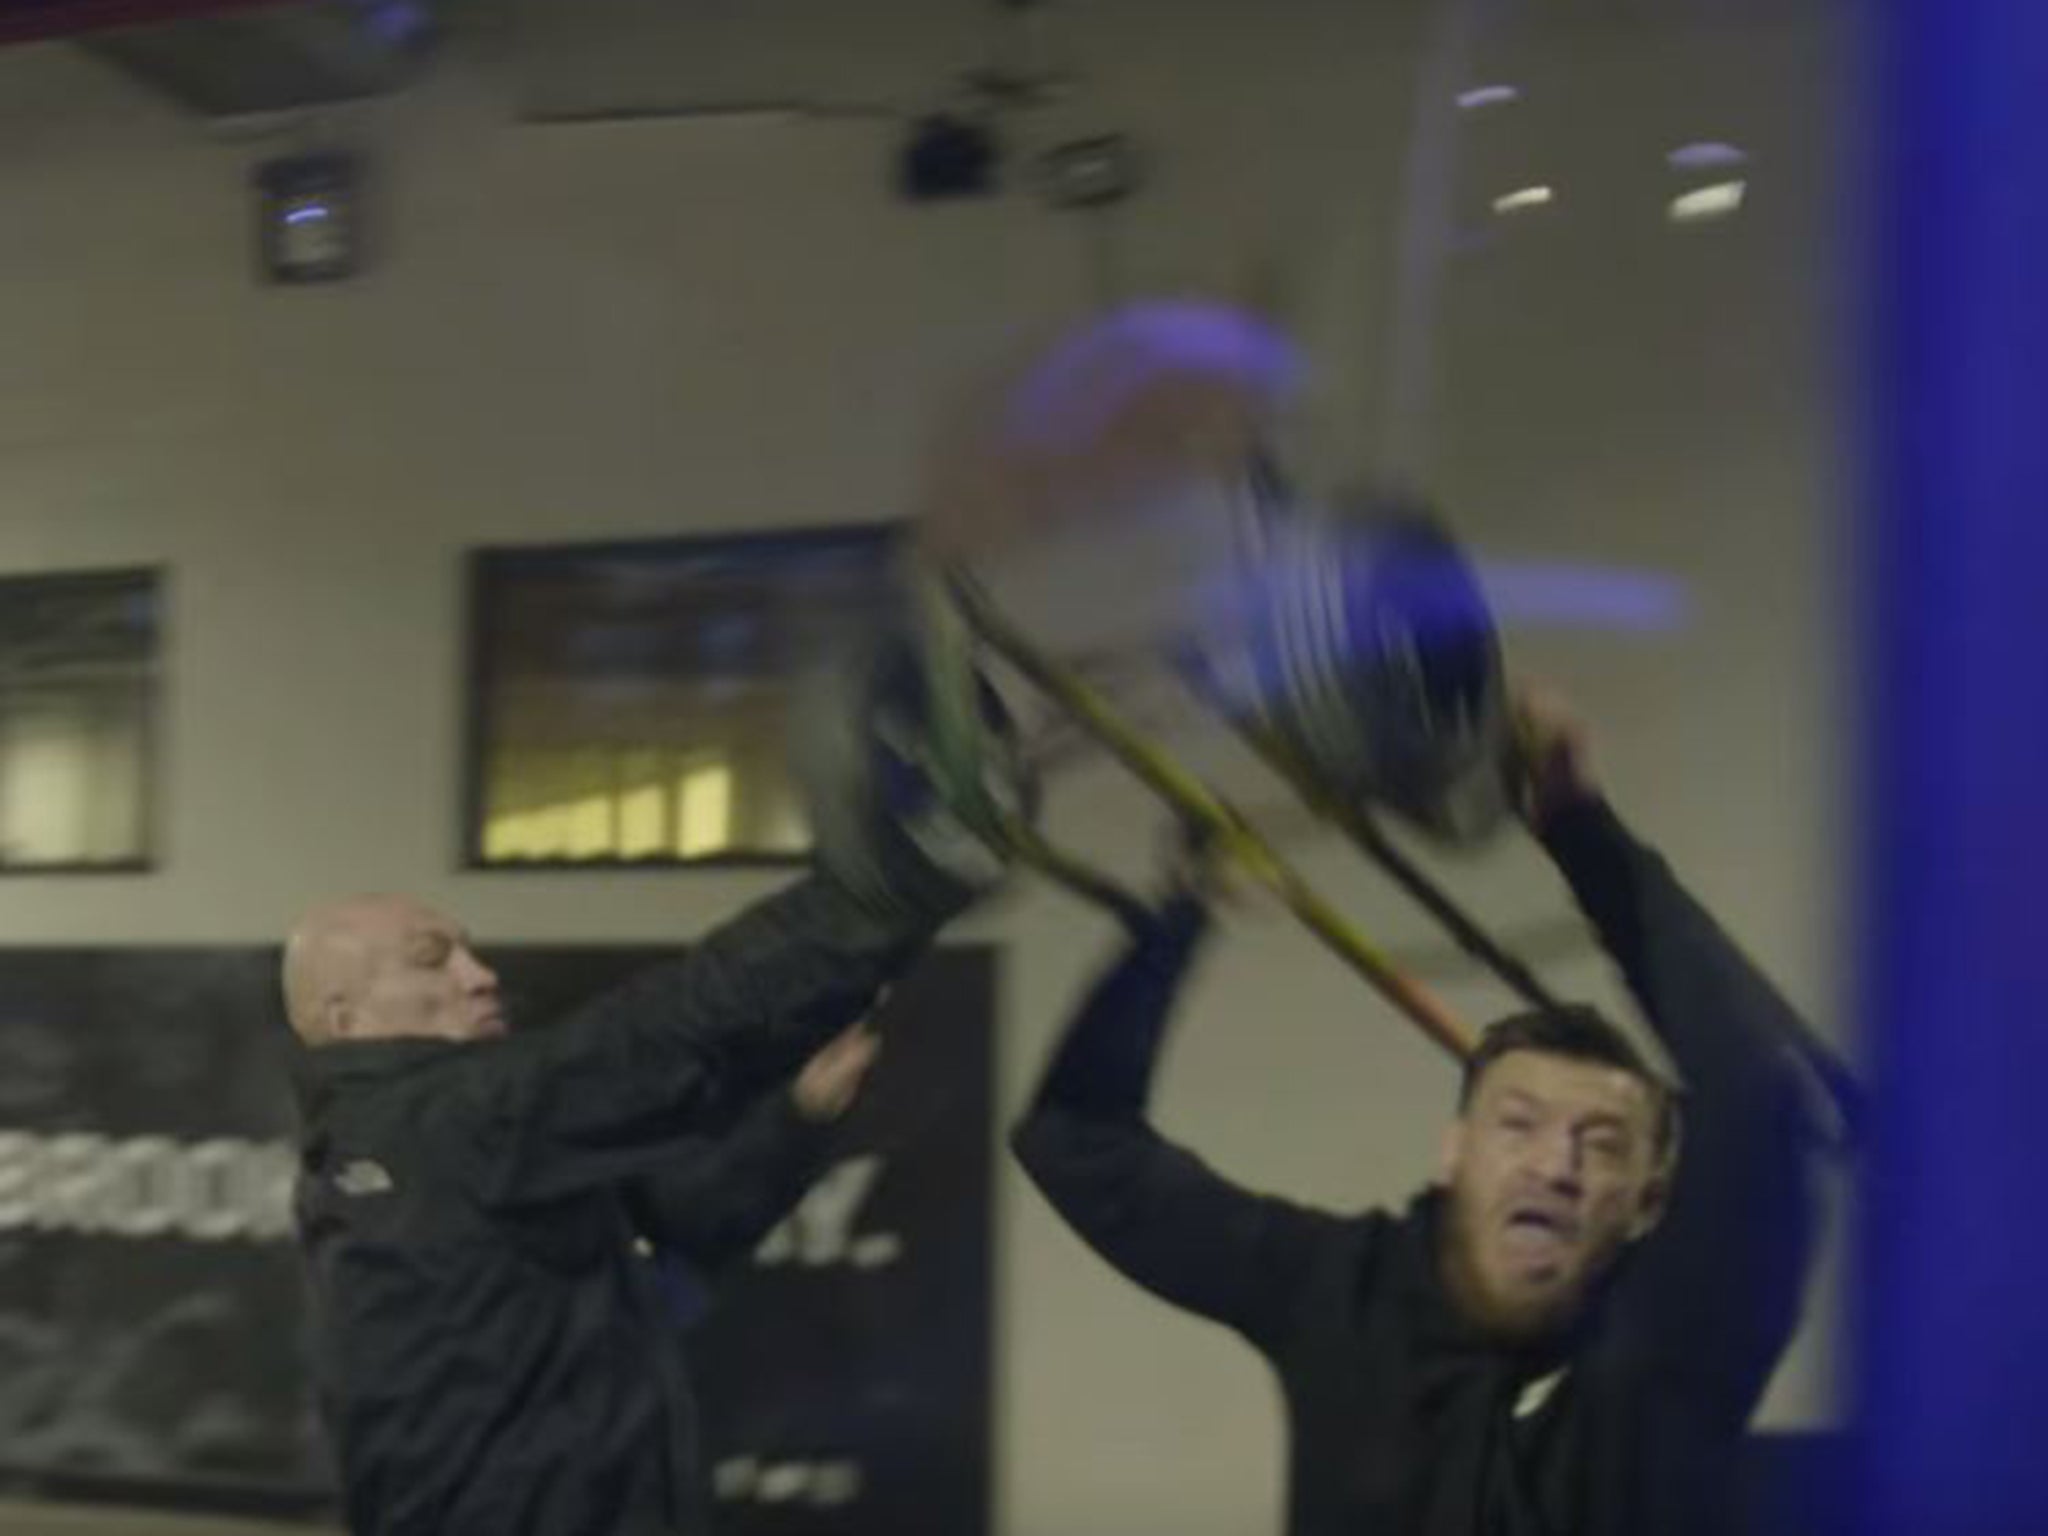 McGregor throws the trolley at the bus of Nurmagomedov at the UFC 223 media day